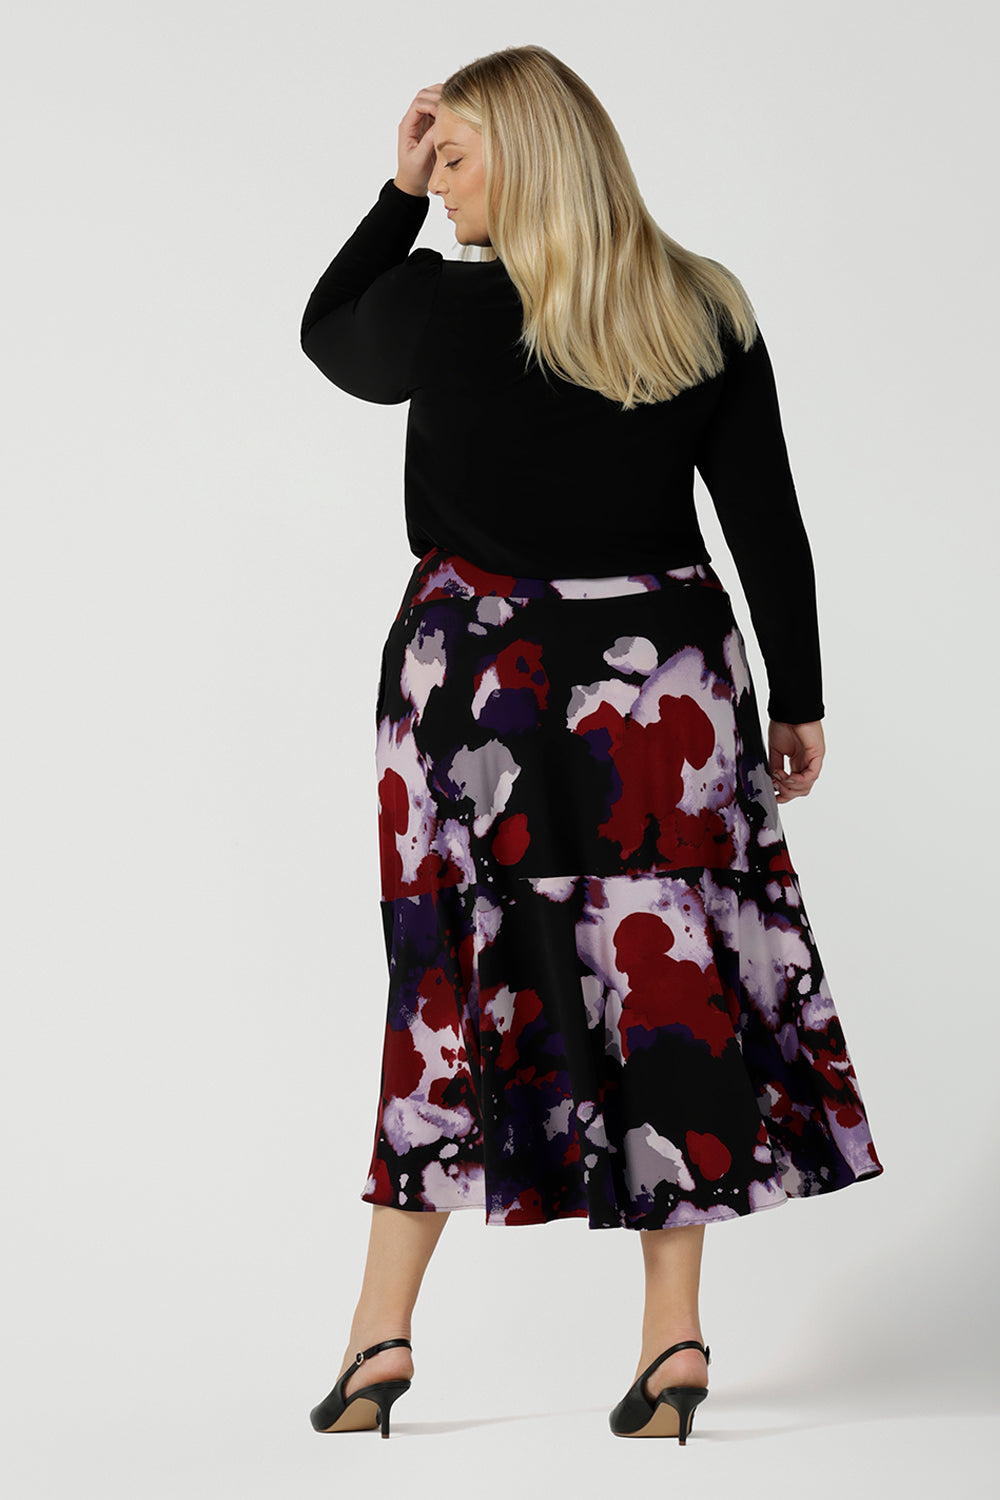 Back view of a size 18 woman wears the Berit Maxi skirt in the Fitzroy Print. Styled back with black pumps. Made in Australia for women size 8 - 24.